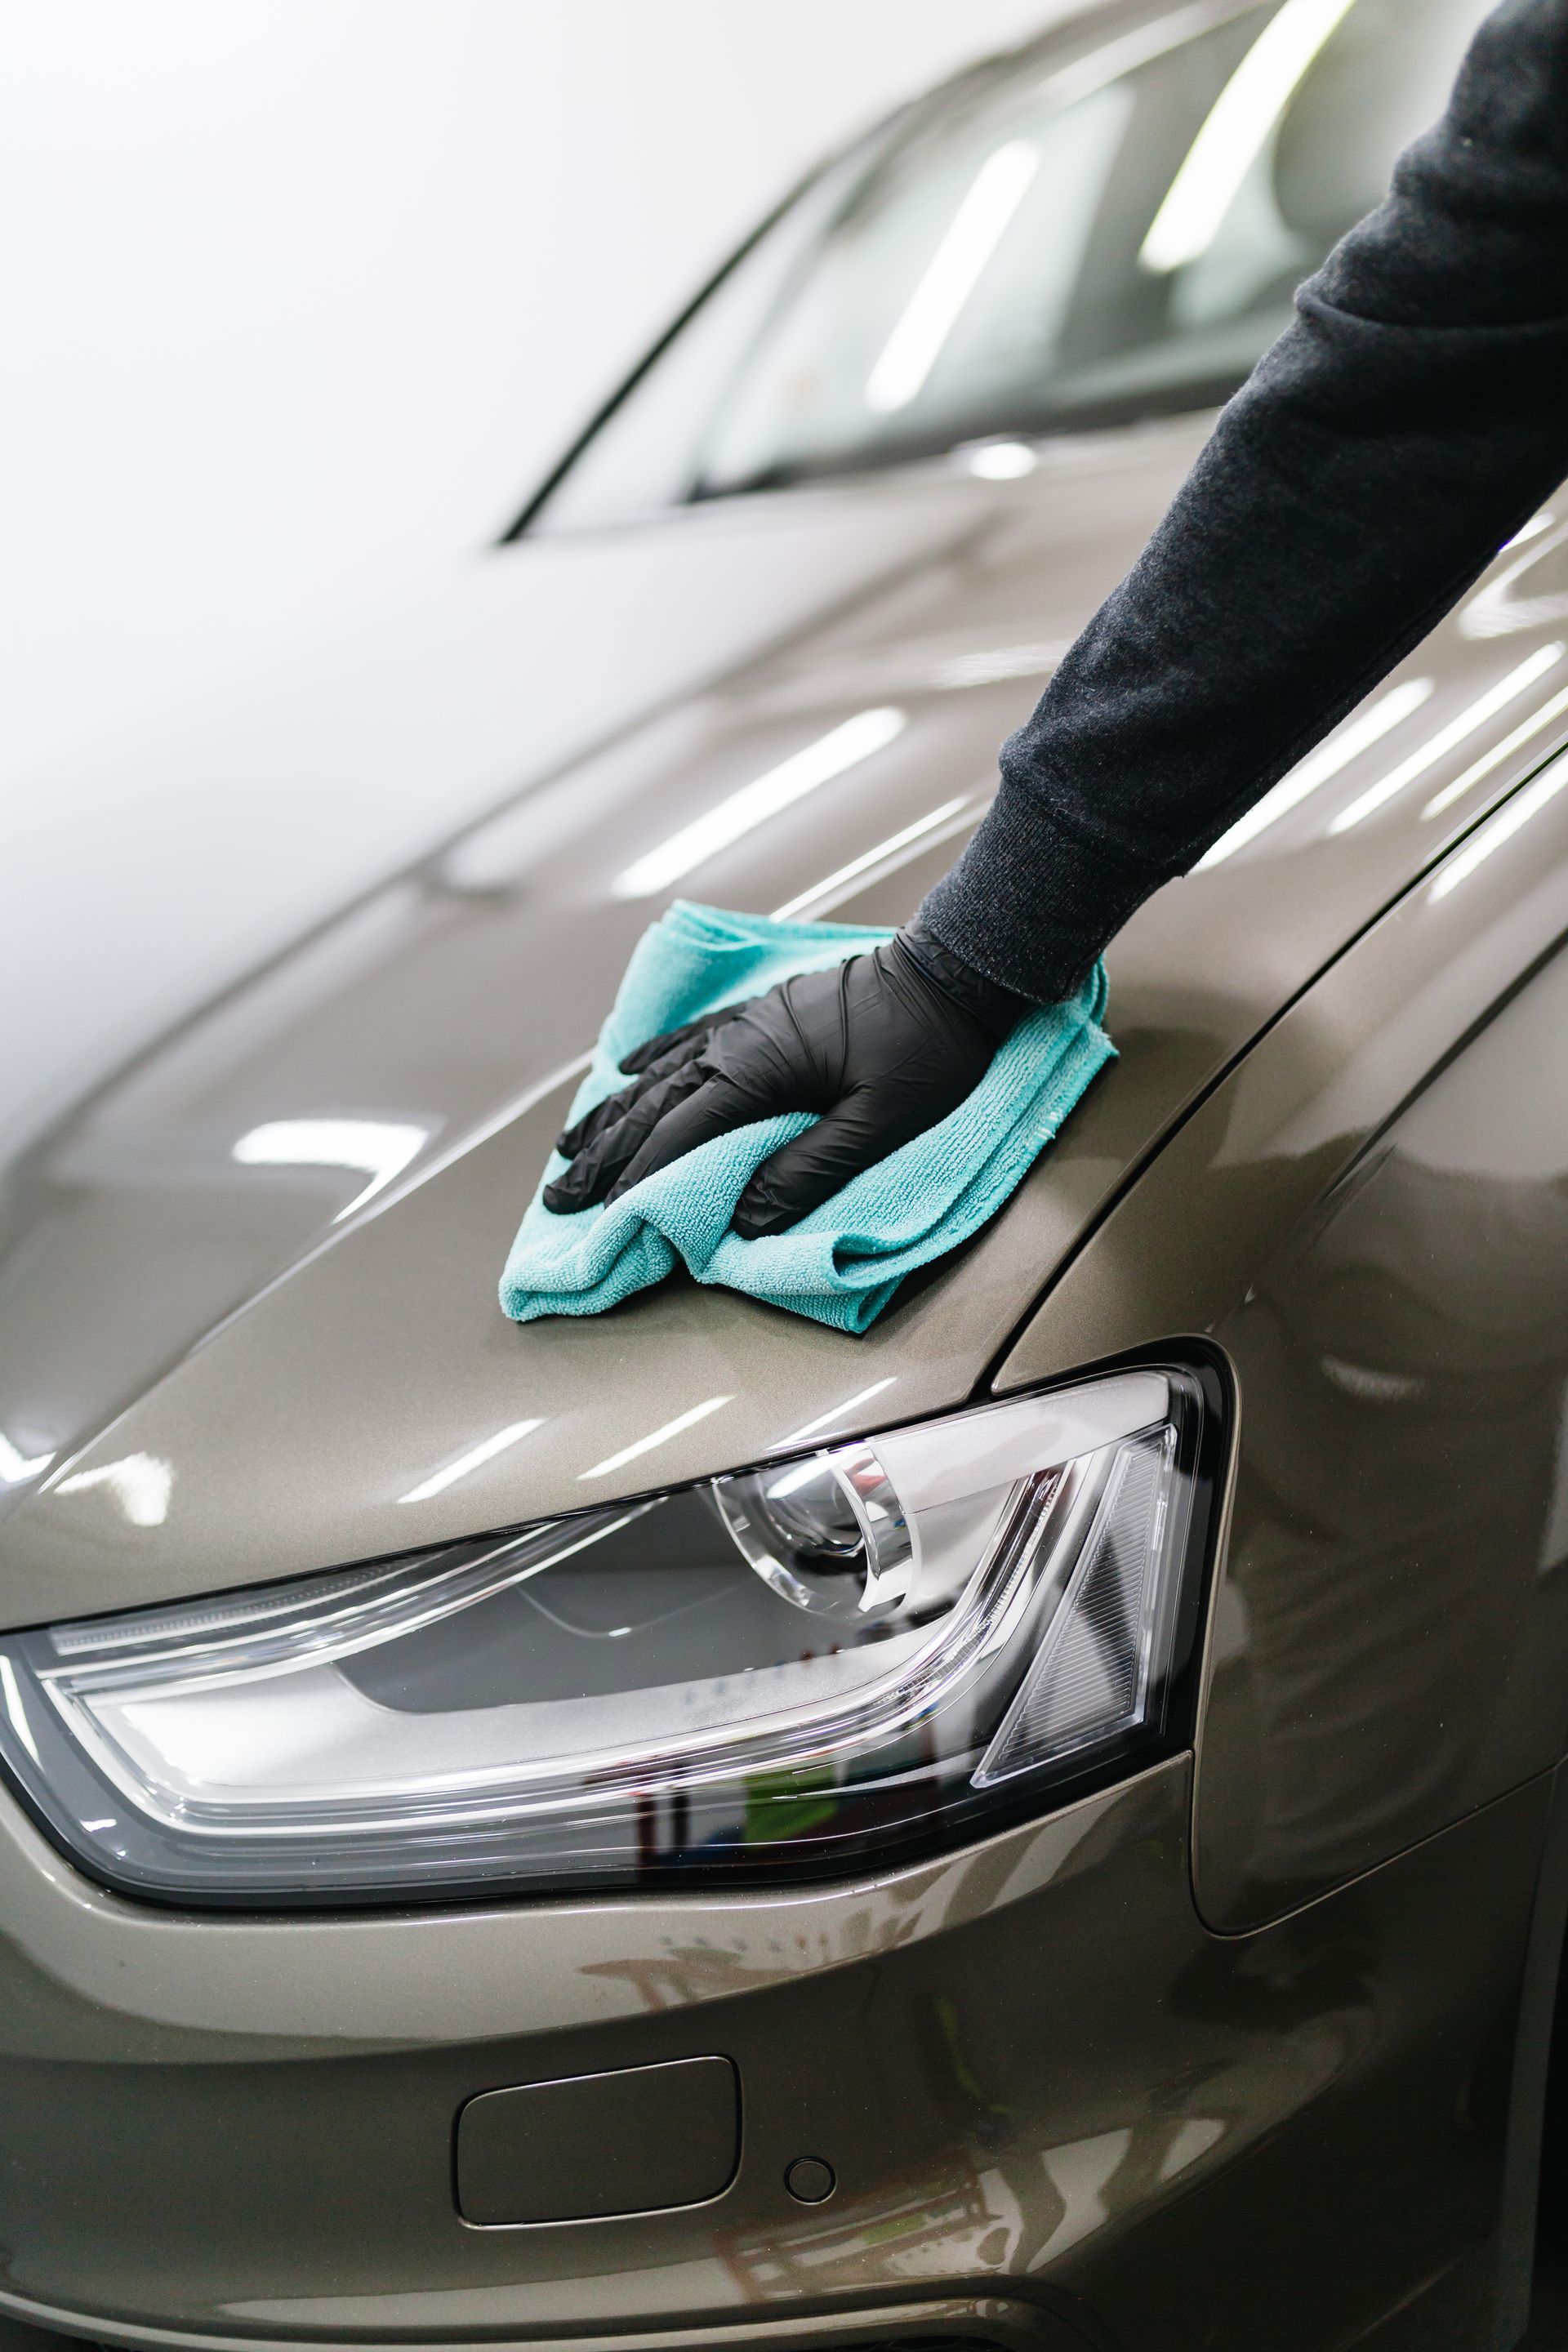 specialist cleaning and wiping car for detailing